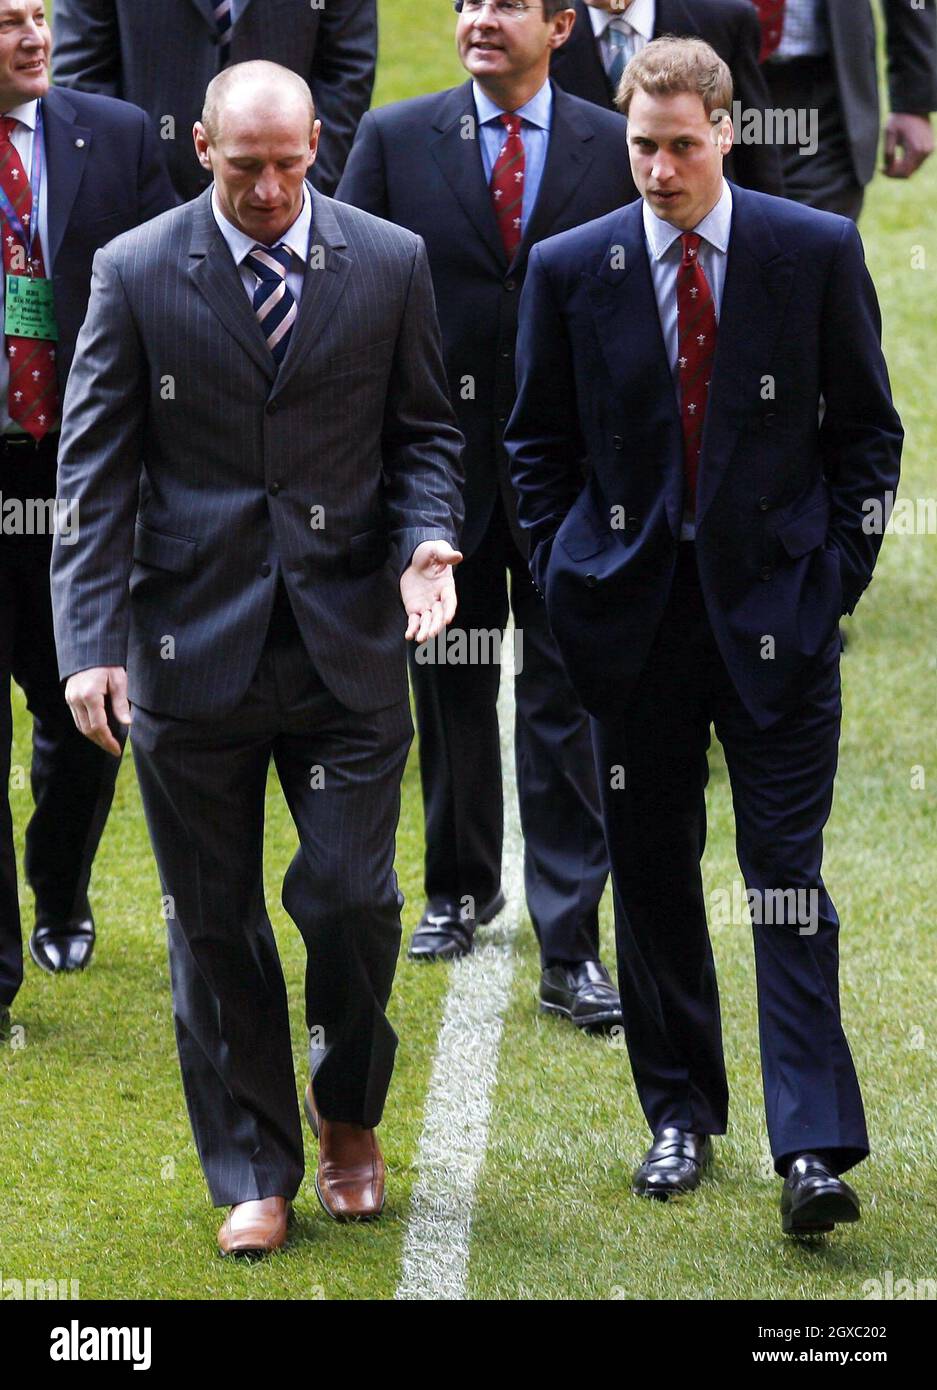 Prince William walks on the pitch with Welsh rugby player Gareth Thomas at the Millennium Stadium, Cardiff on February 4, 2007. Prince William officially took up his role as Vice Royal Patron of the Welsh Rugby Union. The prince was at the Millennium Stadium in Cardiff to see Wales play Ireland in their opening game of the Six Nations tournament. Anwar Hussein/EMPICS Entertainment Stock Photo